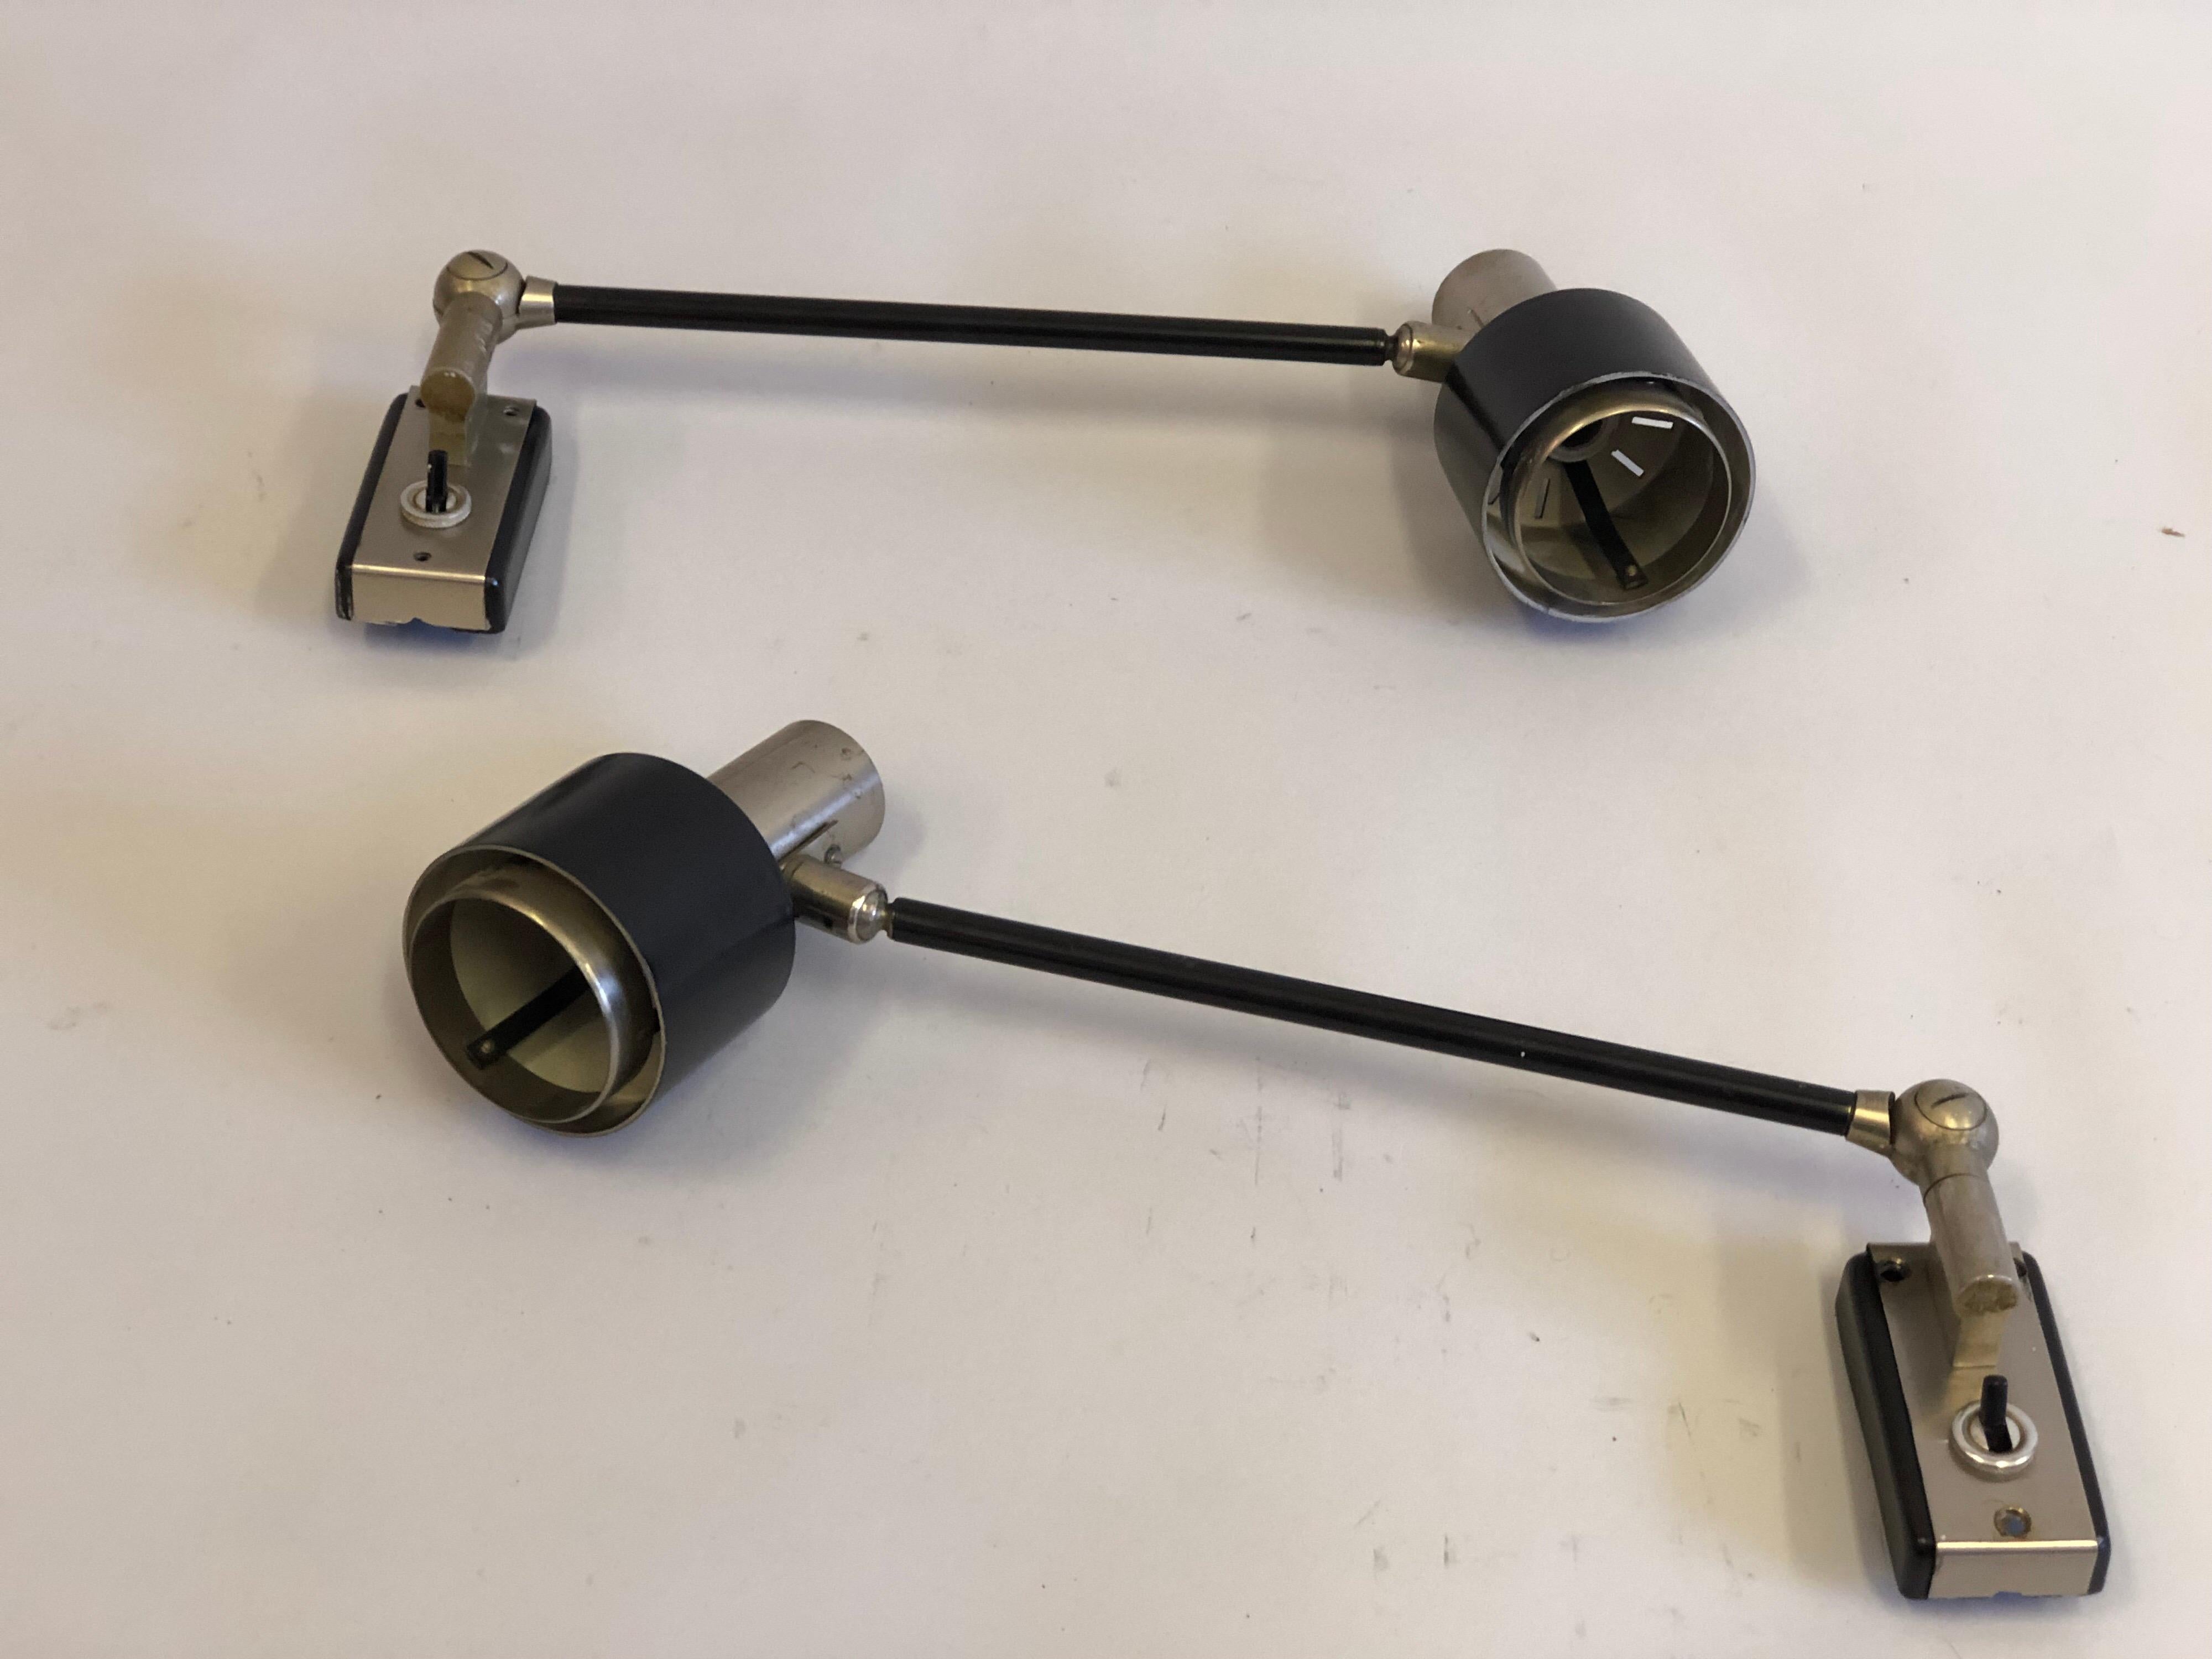 Pair of Italian Mid-Century Modern articulating brushed stainless steel and black enameled steel wall sconces / flush mounts by Stilnovo, Italy, circa 1960.

The pieces are adjustable, articulate fully and are multi-functional and can serve as